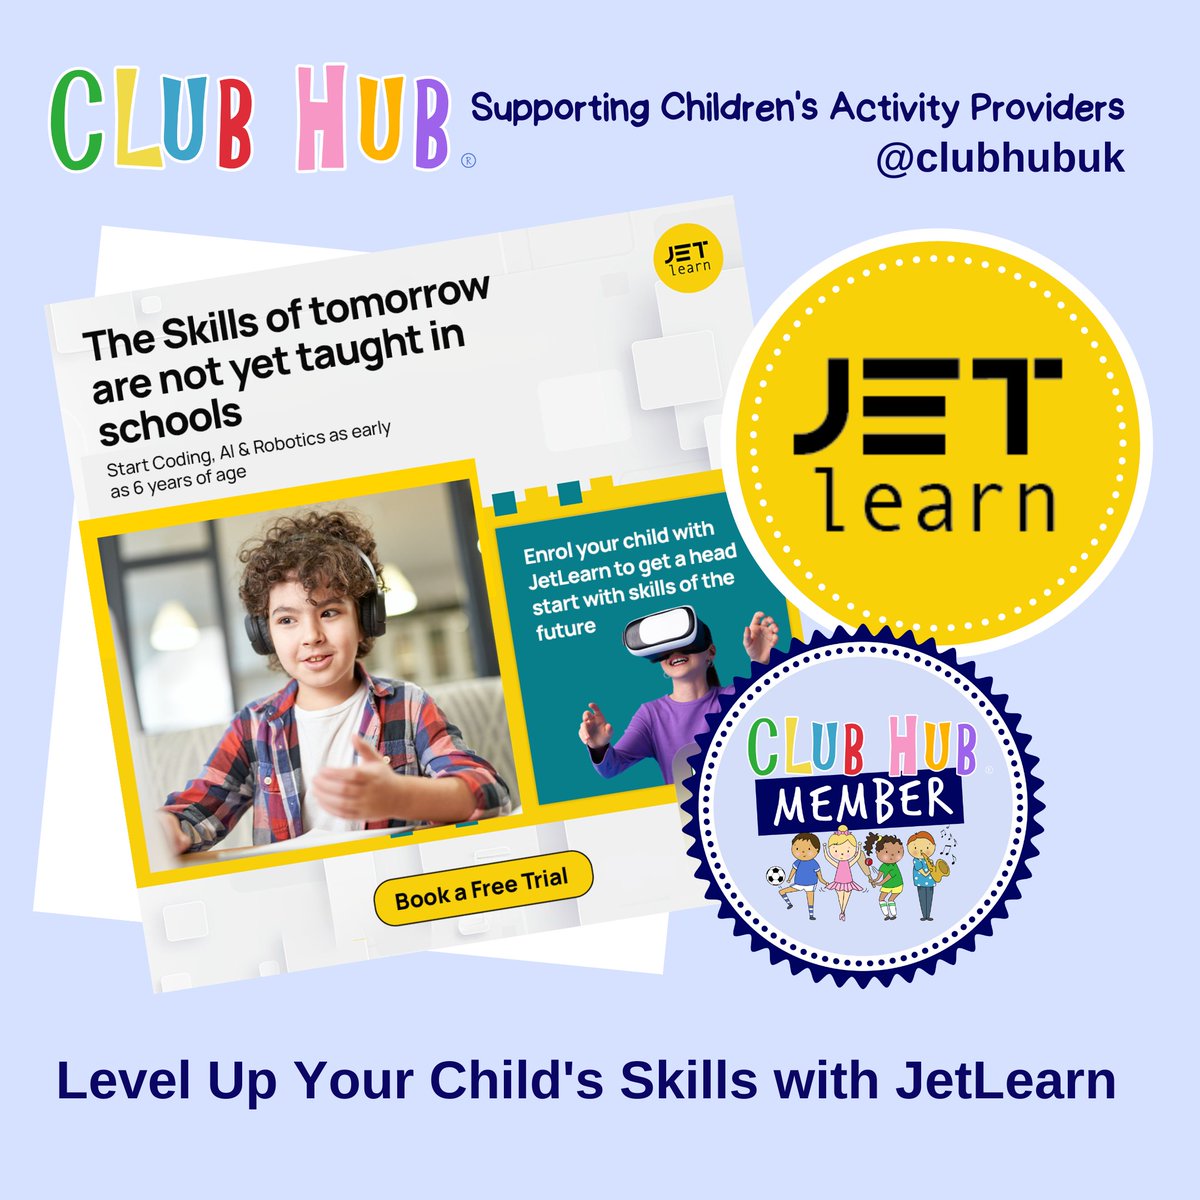 Level Up Your Child's Skills with JetLearn

AI, Coding, and robotics are the skills of the future. Give your child a head start with JetLearn's personalized 1:1 online classes. Take the first step. Sign up for a free trial today! @jet_learn

#jetlearn #clubhubmember